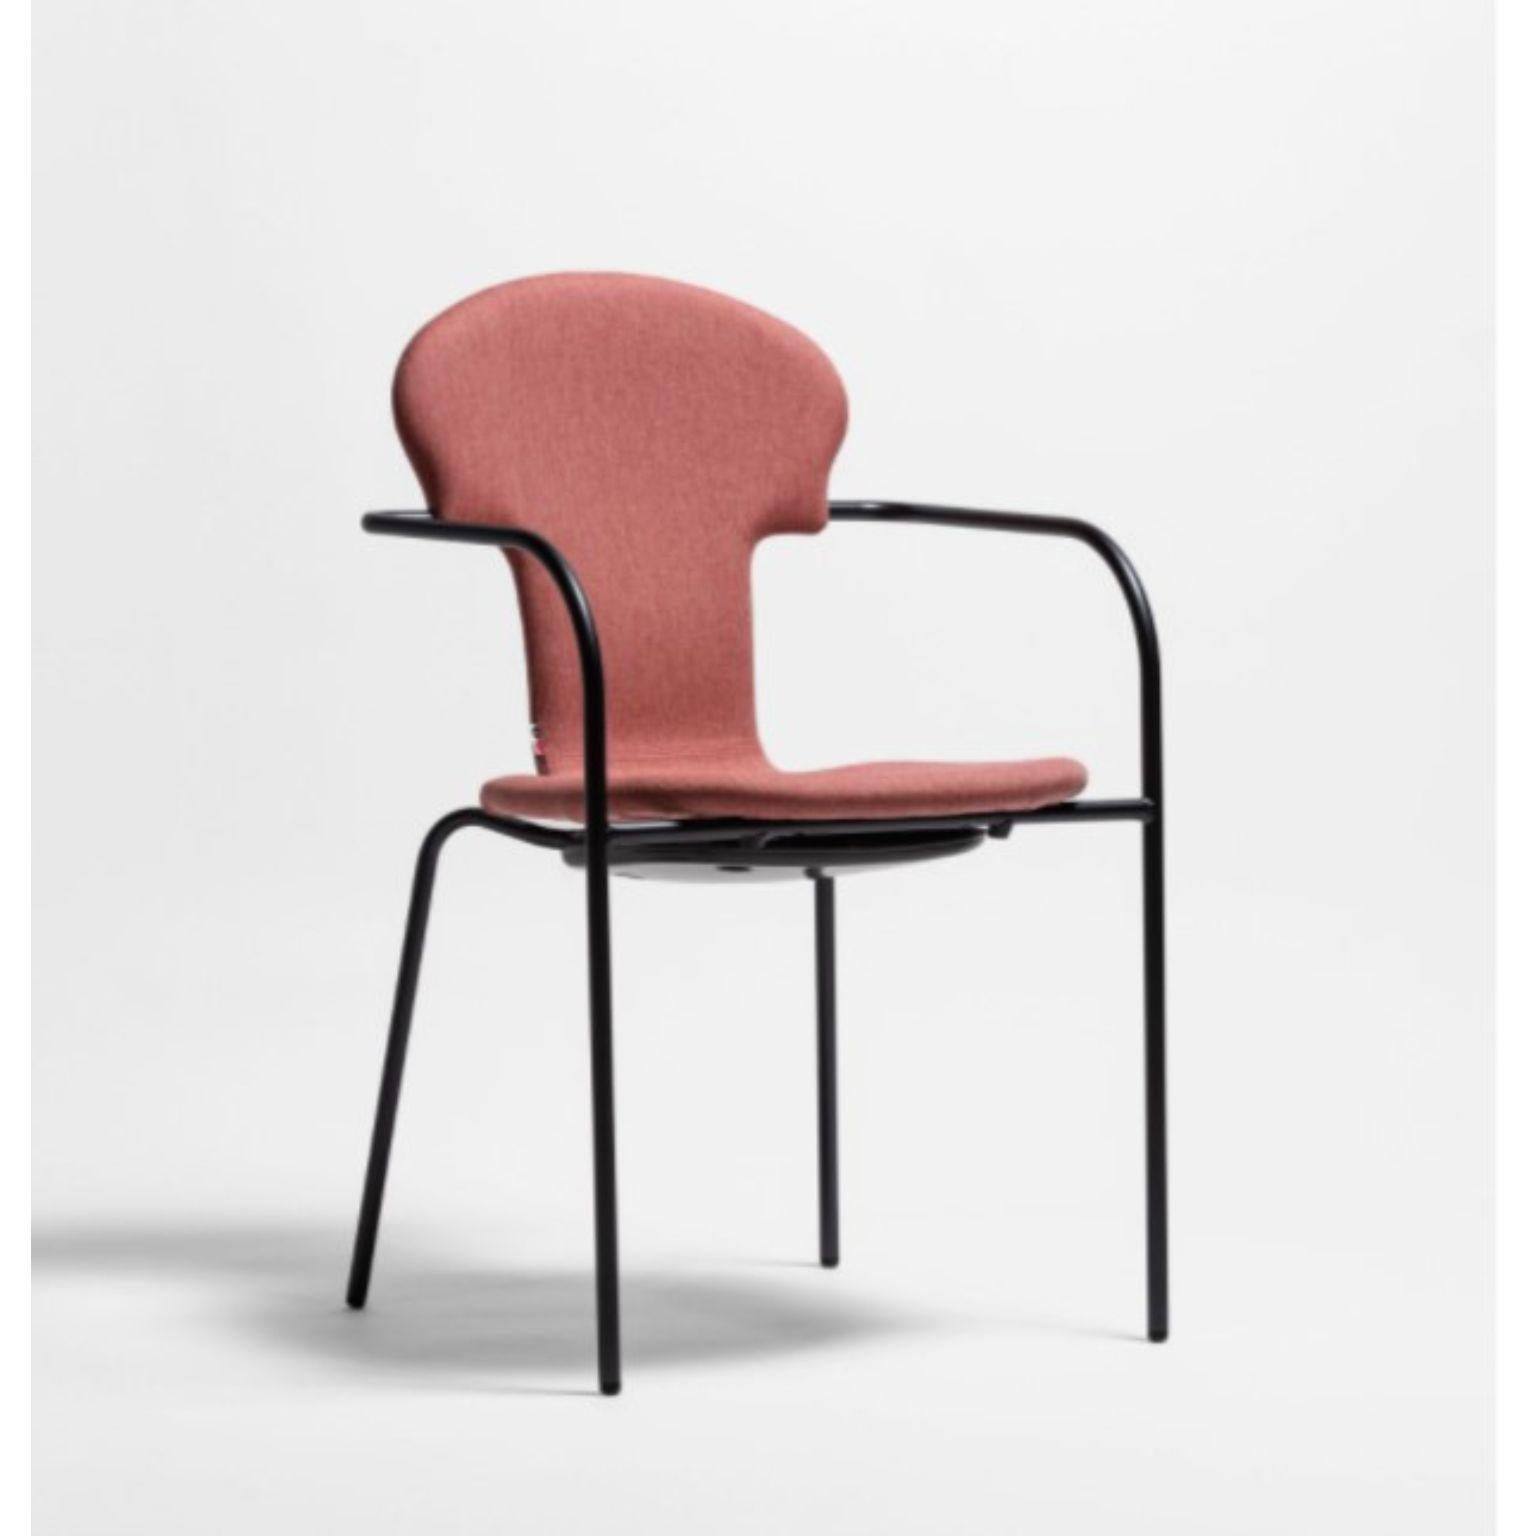 Minivarius Red chair by Oscar Tusquets
Dimensions: D 53 x W 52 x H 82 cm 
Materials: Structure in tubular steel painted in anodic black. A one-piece seat in gas injected polypropylene in black or white. Also available in an upholstered
version in